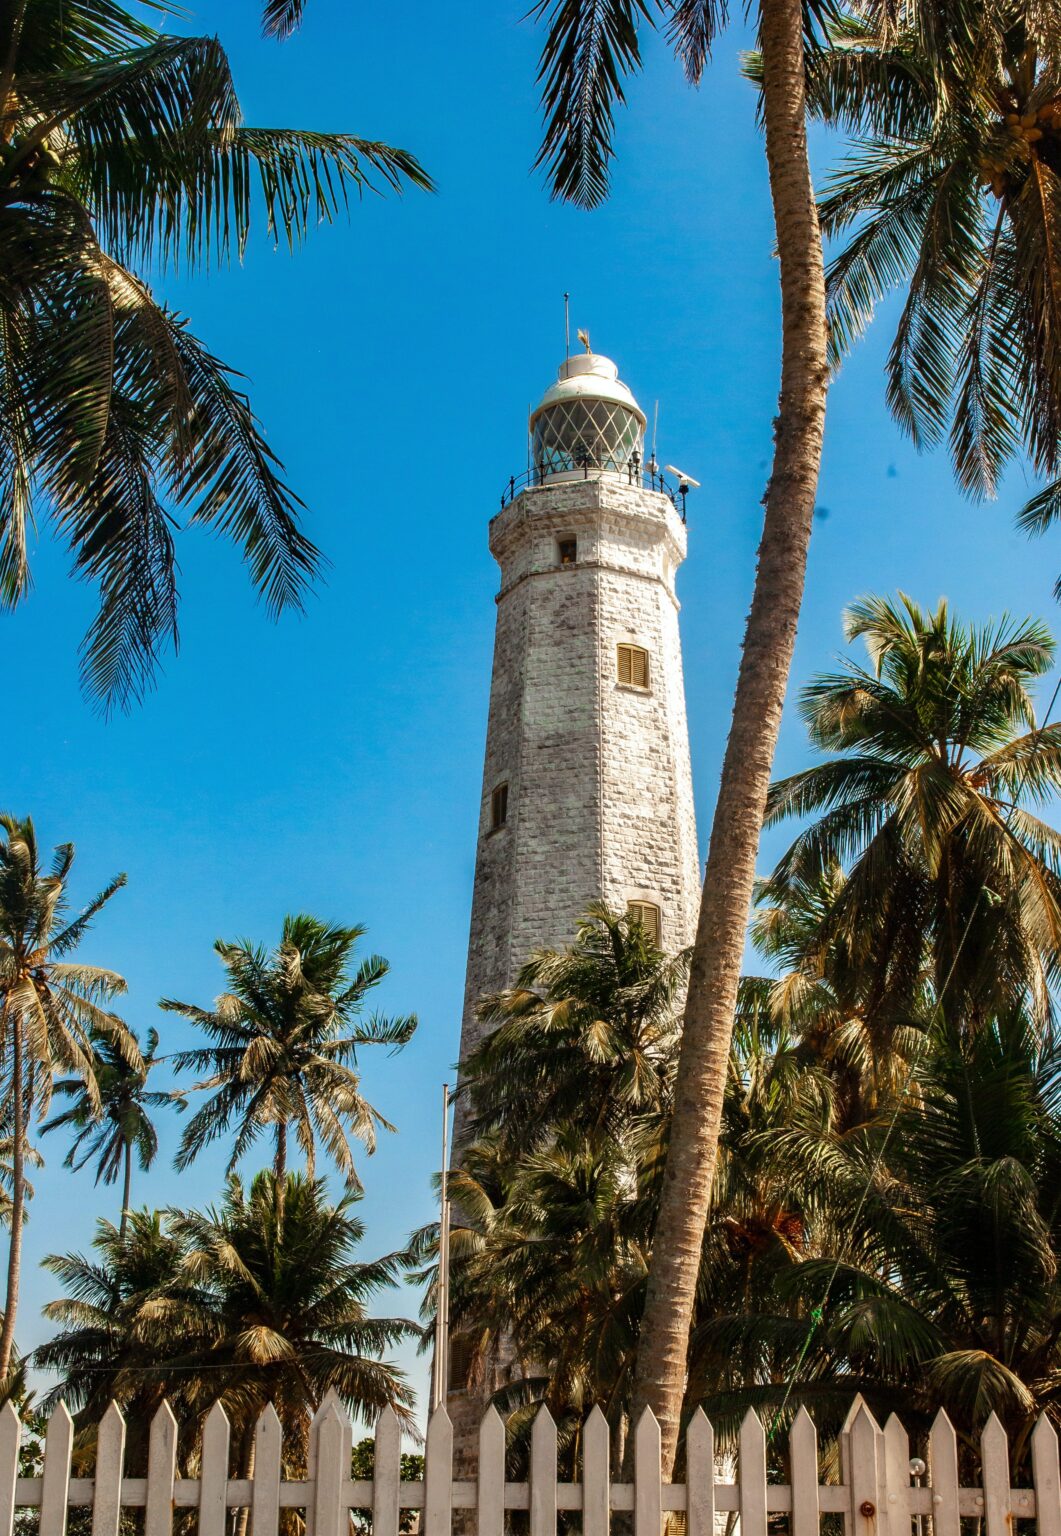 A tall tower or building with a lush greenery of coconut trees in the foreground